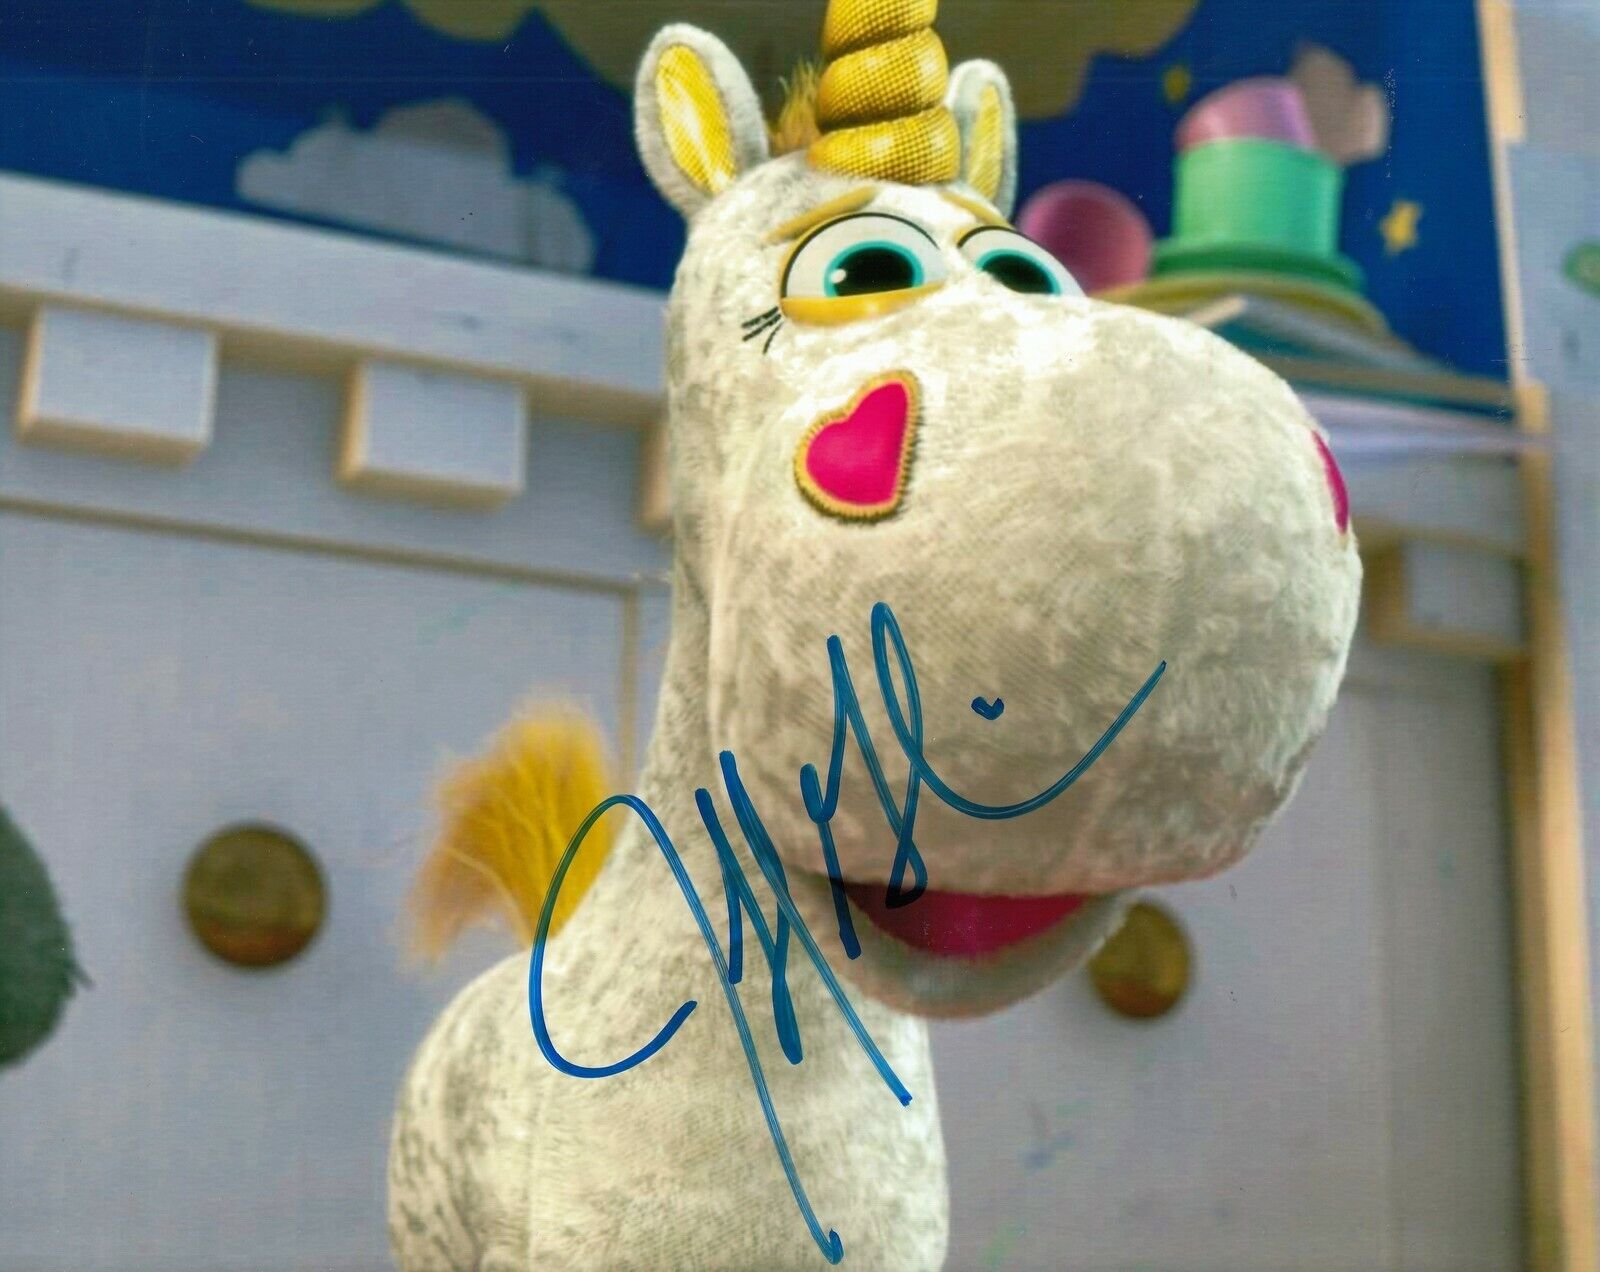 JEFF GARLIN signed (TOY STORY) Movie 8X10 Photo Poster painting *Buttercup* W/COA #2